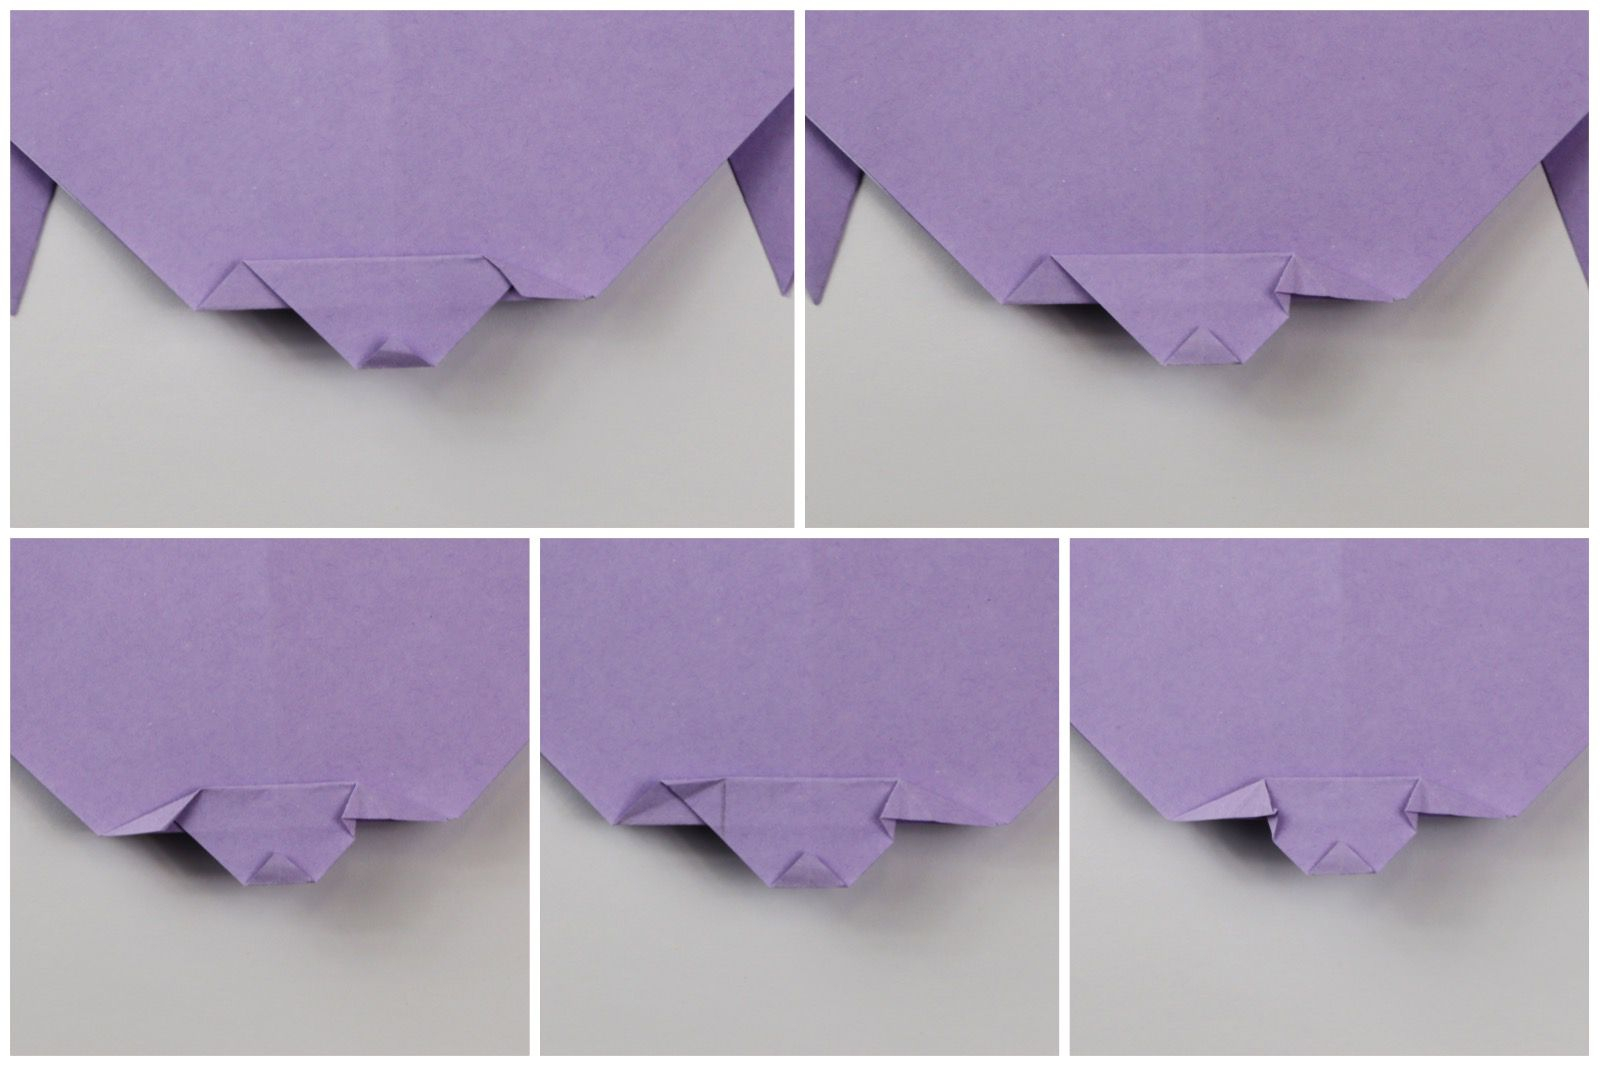 Origami Dog Instructions Advanced Easy Origami Puppy Face Instructions